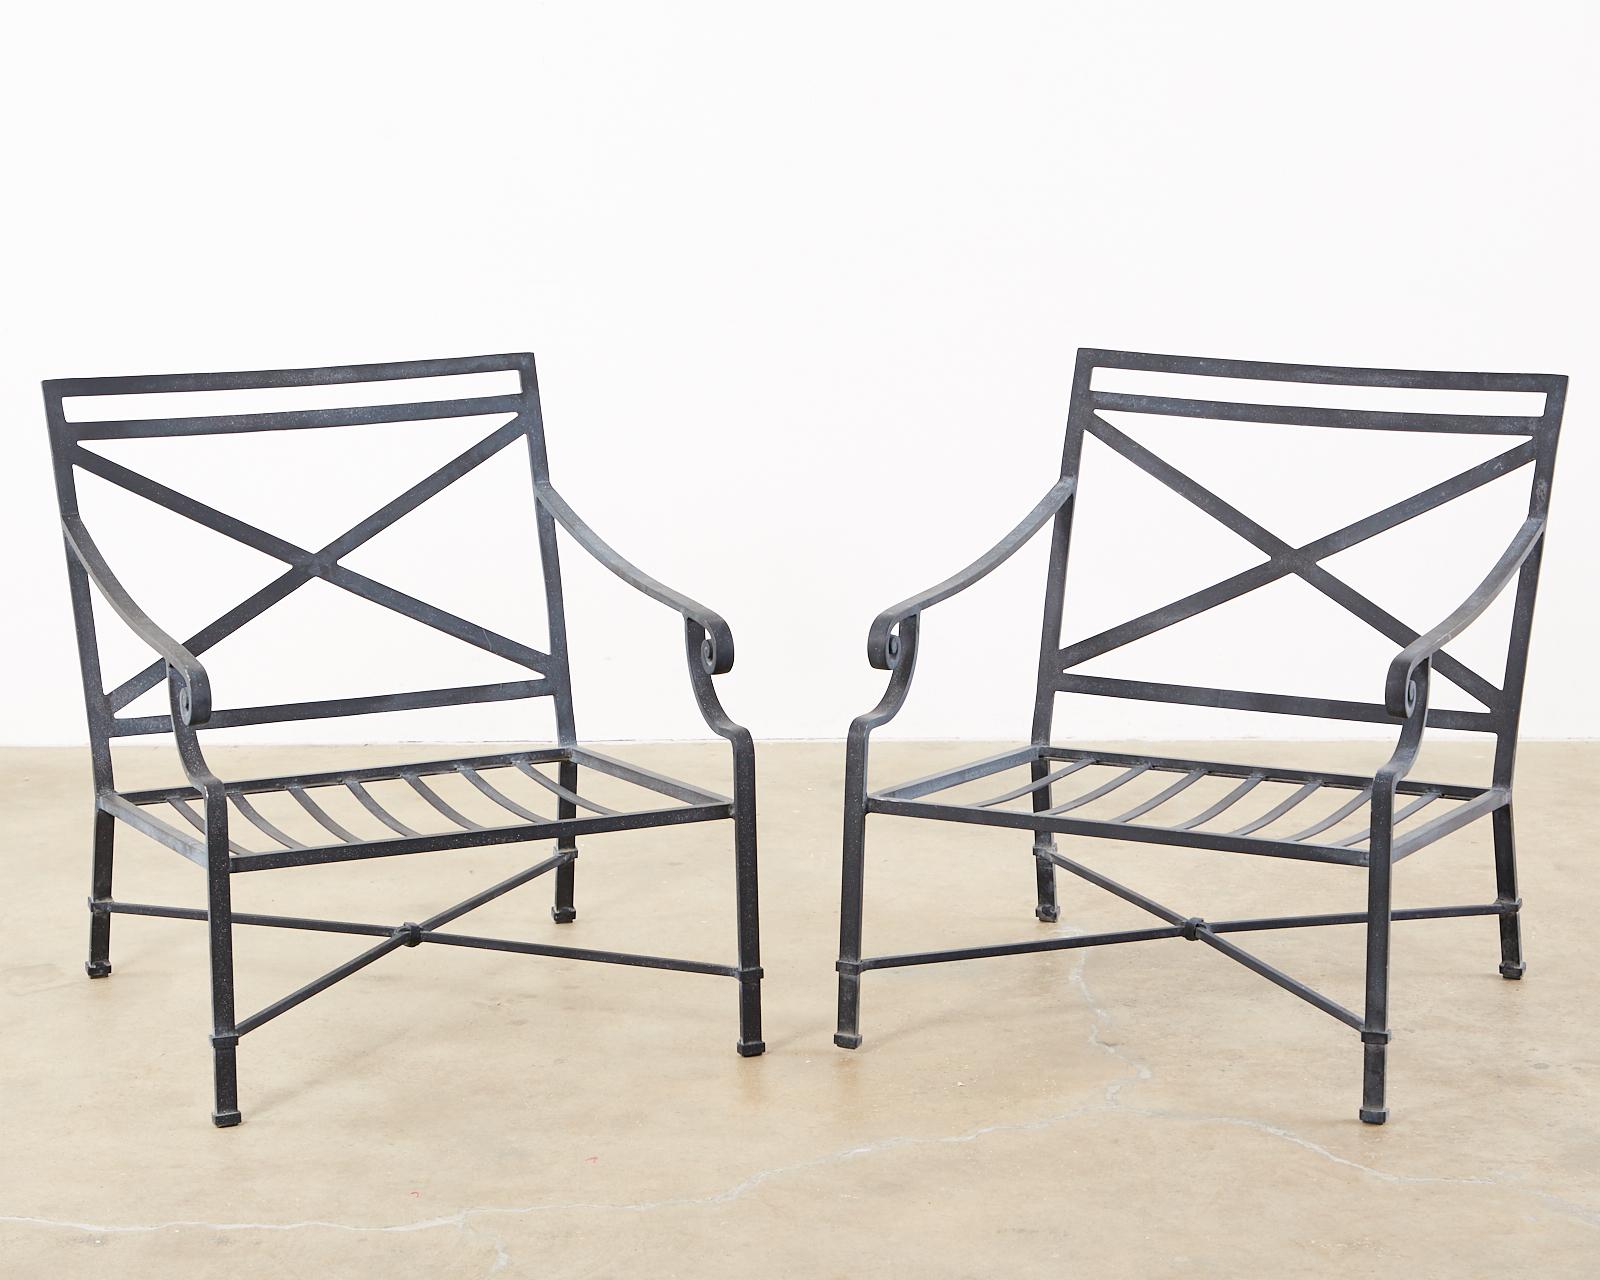 Bright set of six large patio or garden lounge chairs made by Brown Jordan. Constructed from wrought aluminum with a multi-step powder coated finish. The black metal patina has very faint silver and gold flecks on the finish. Known as Brown Jordan's